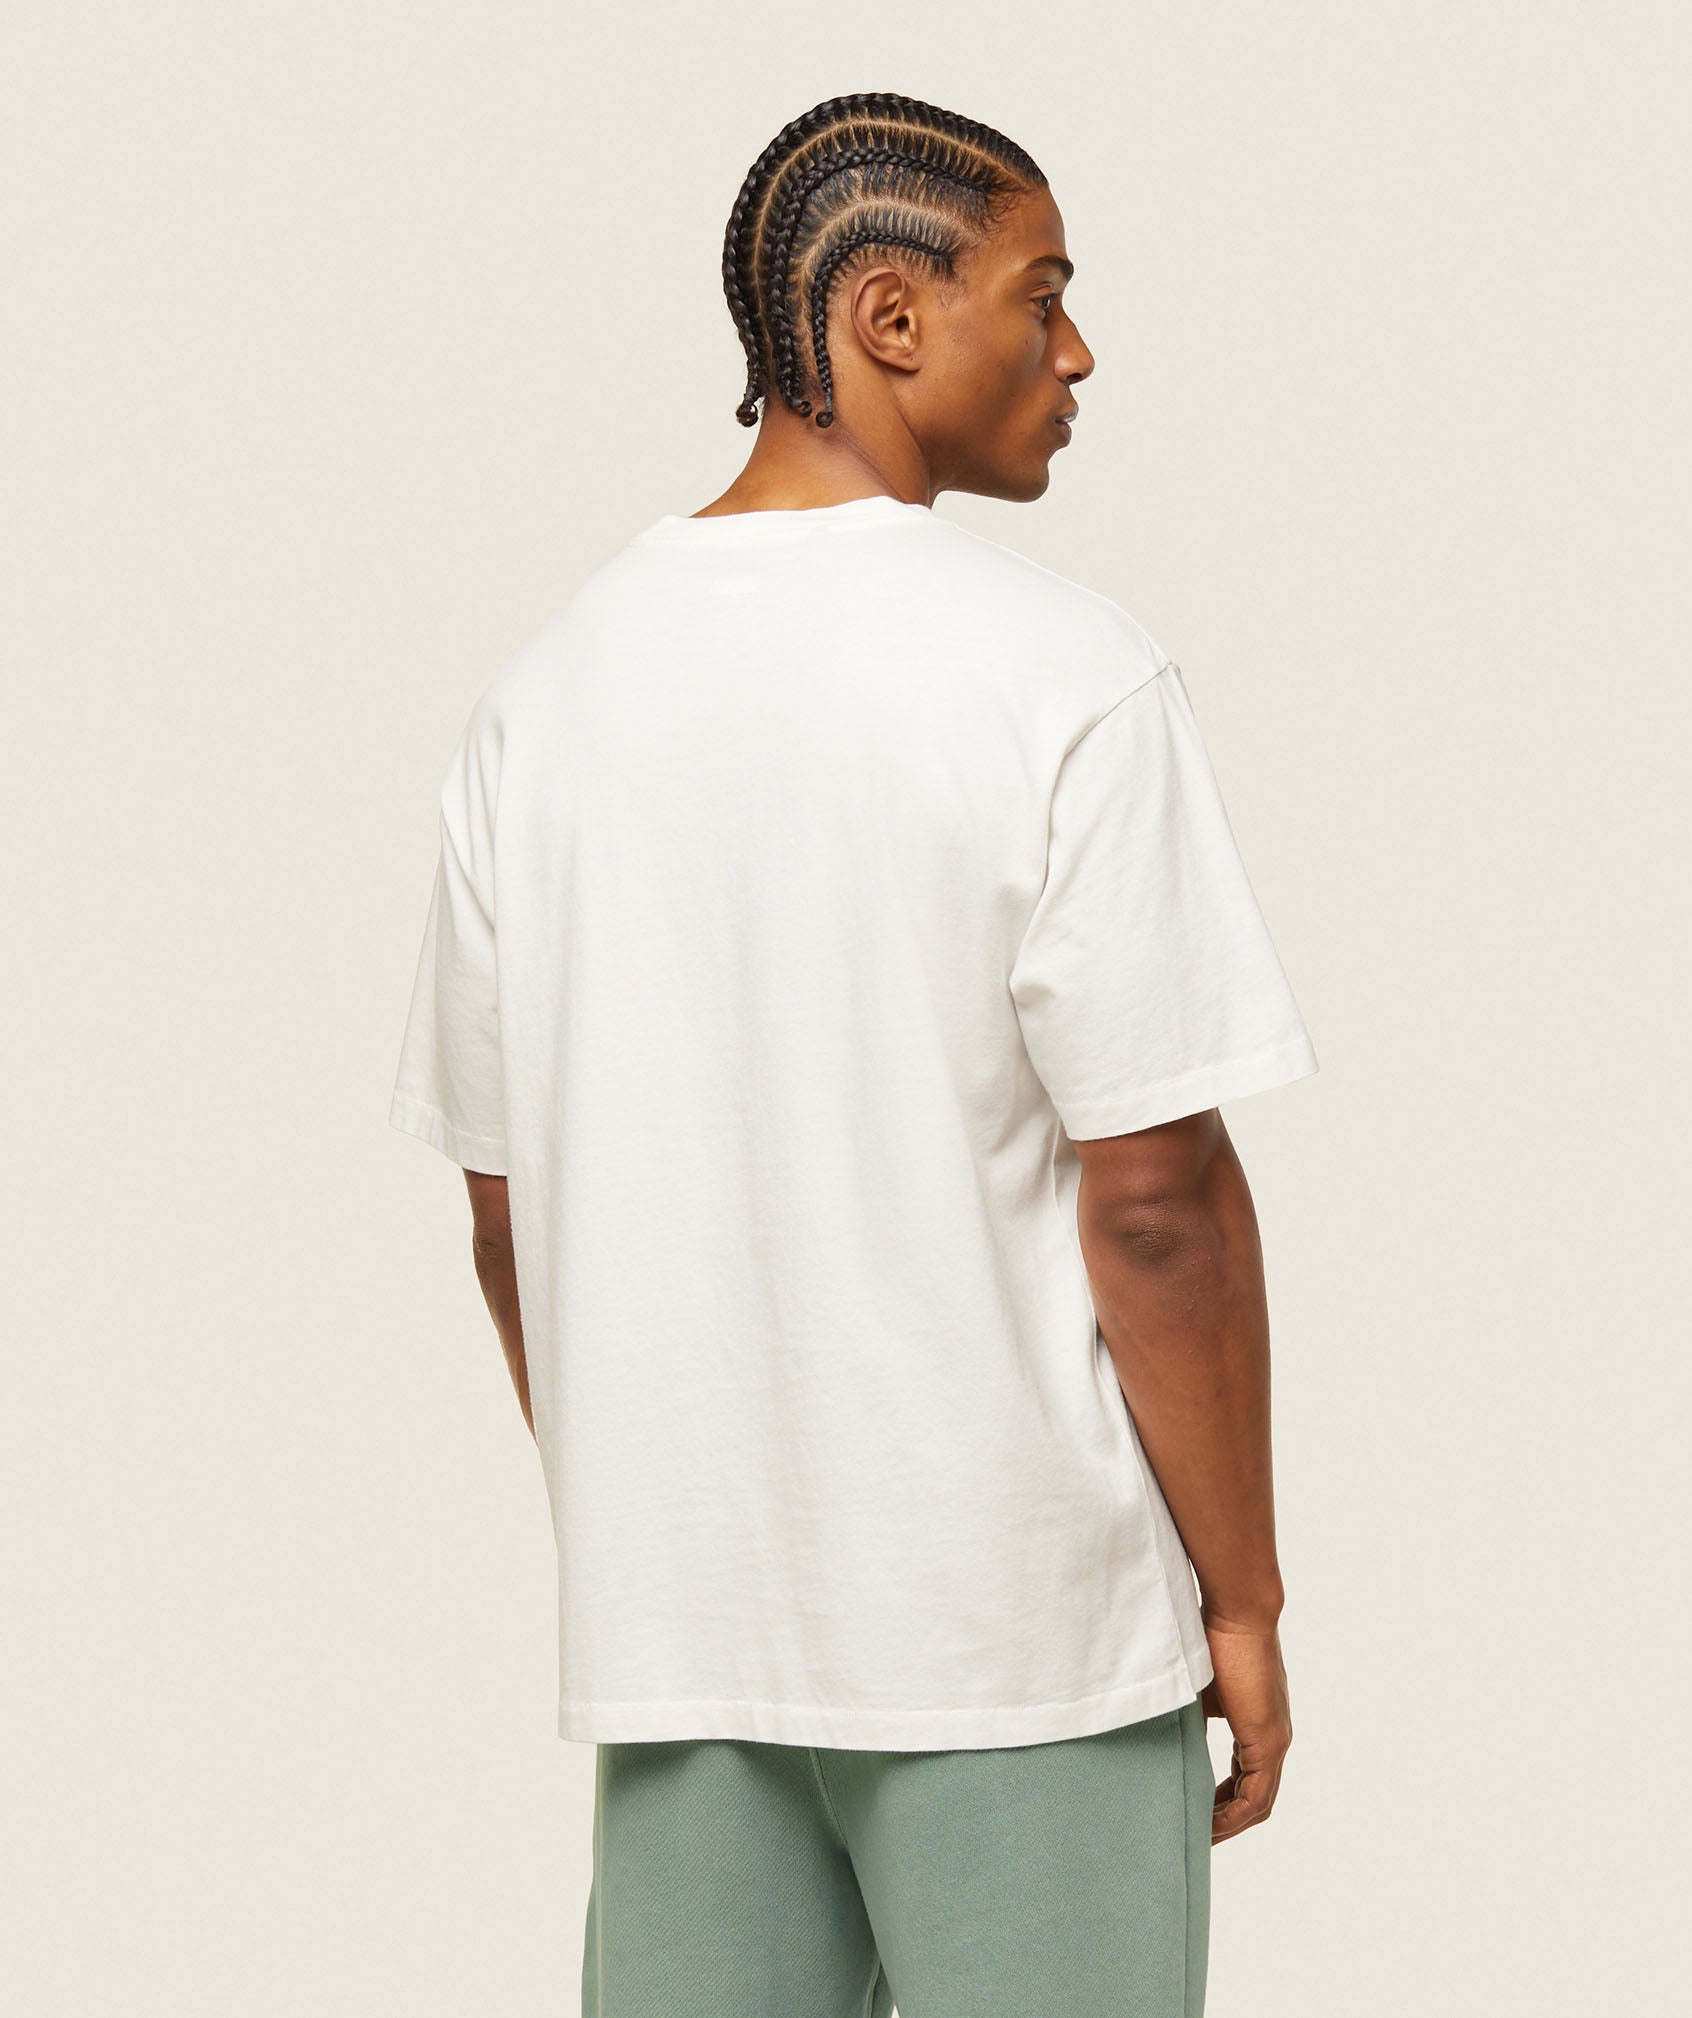 everywear Relaxed T-Shirt in Soft White - view 3